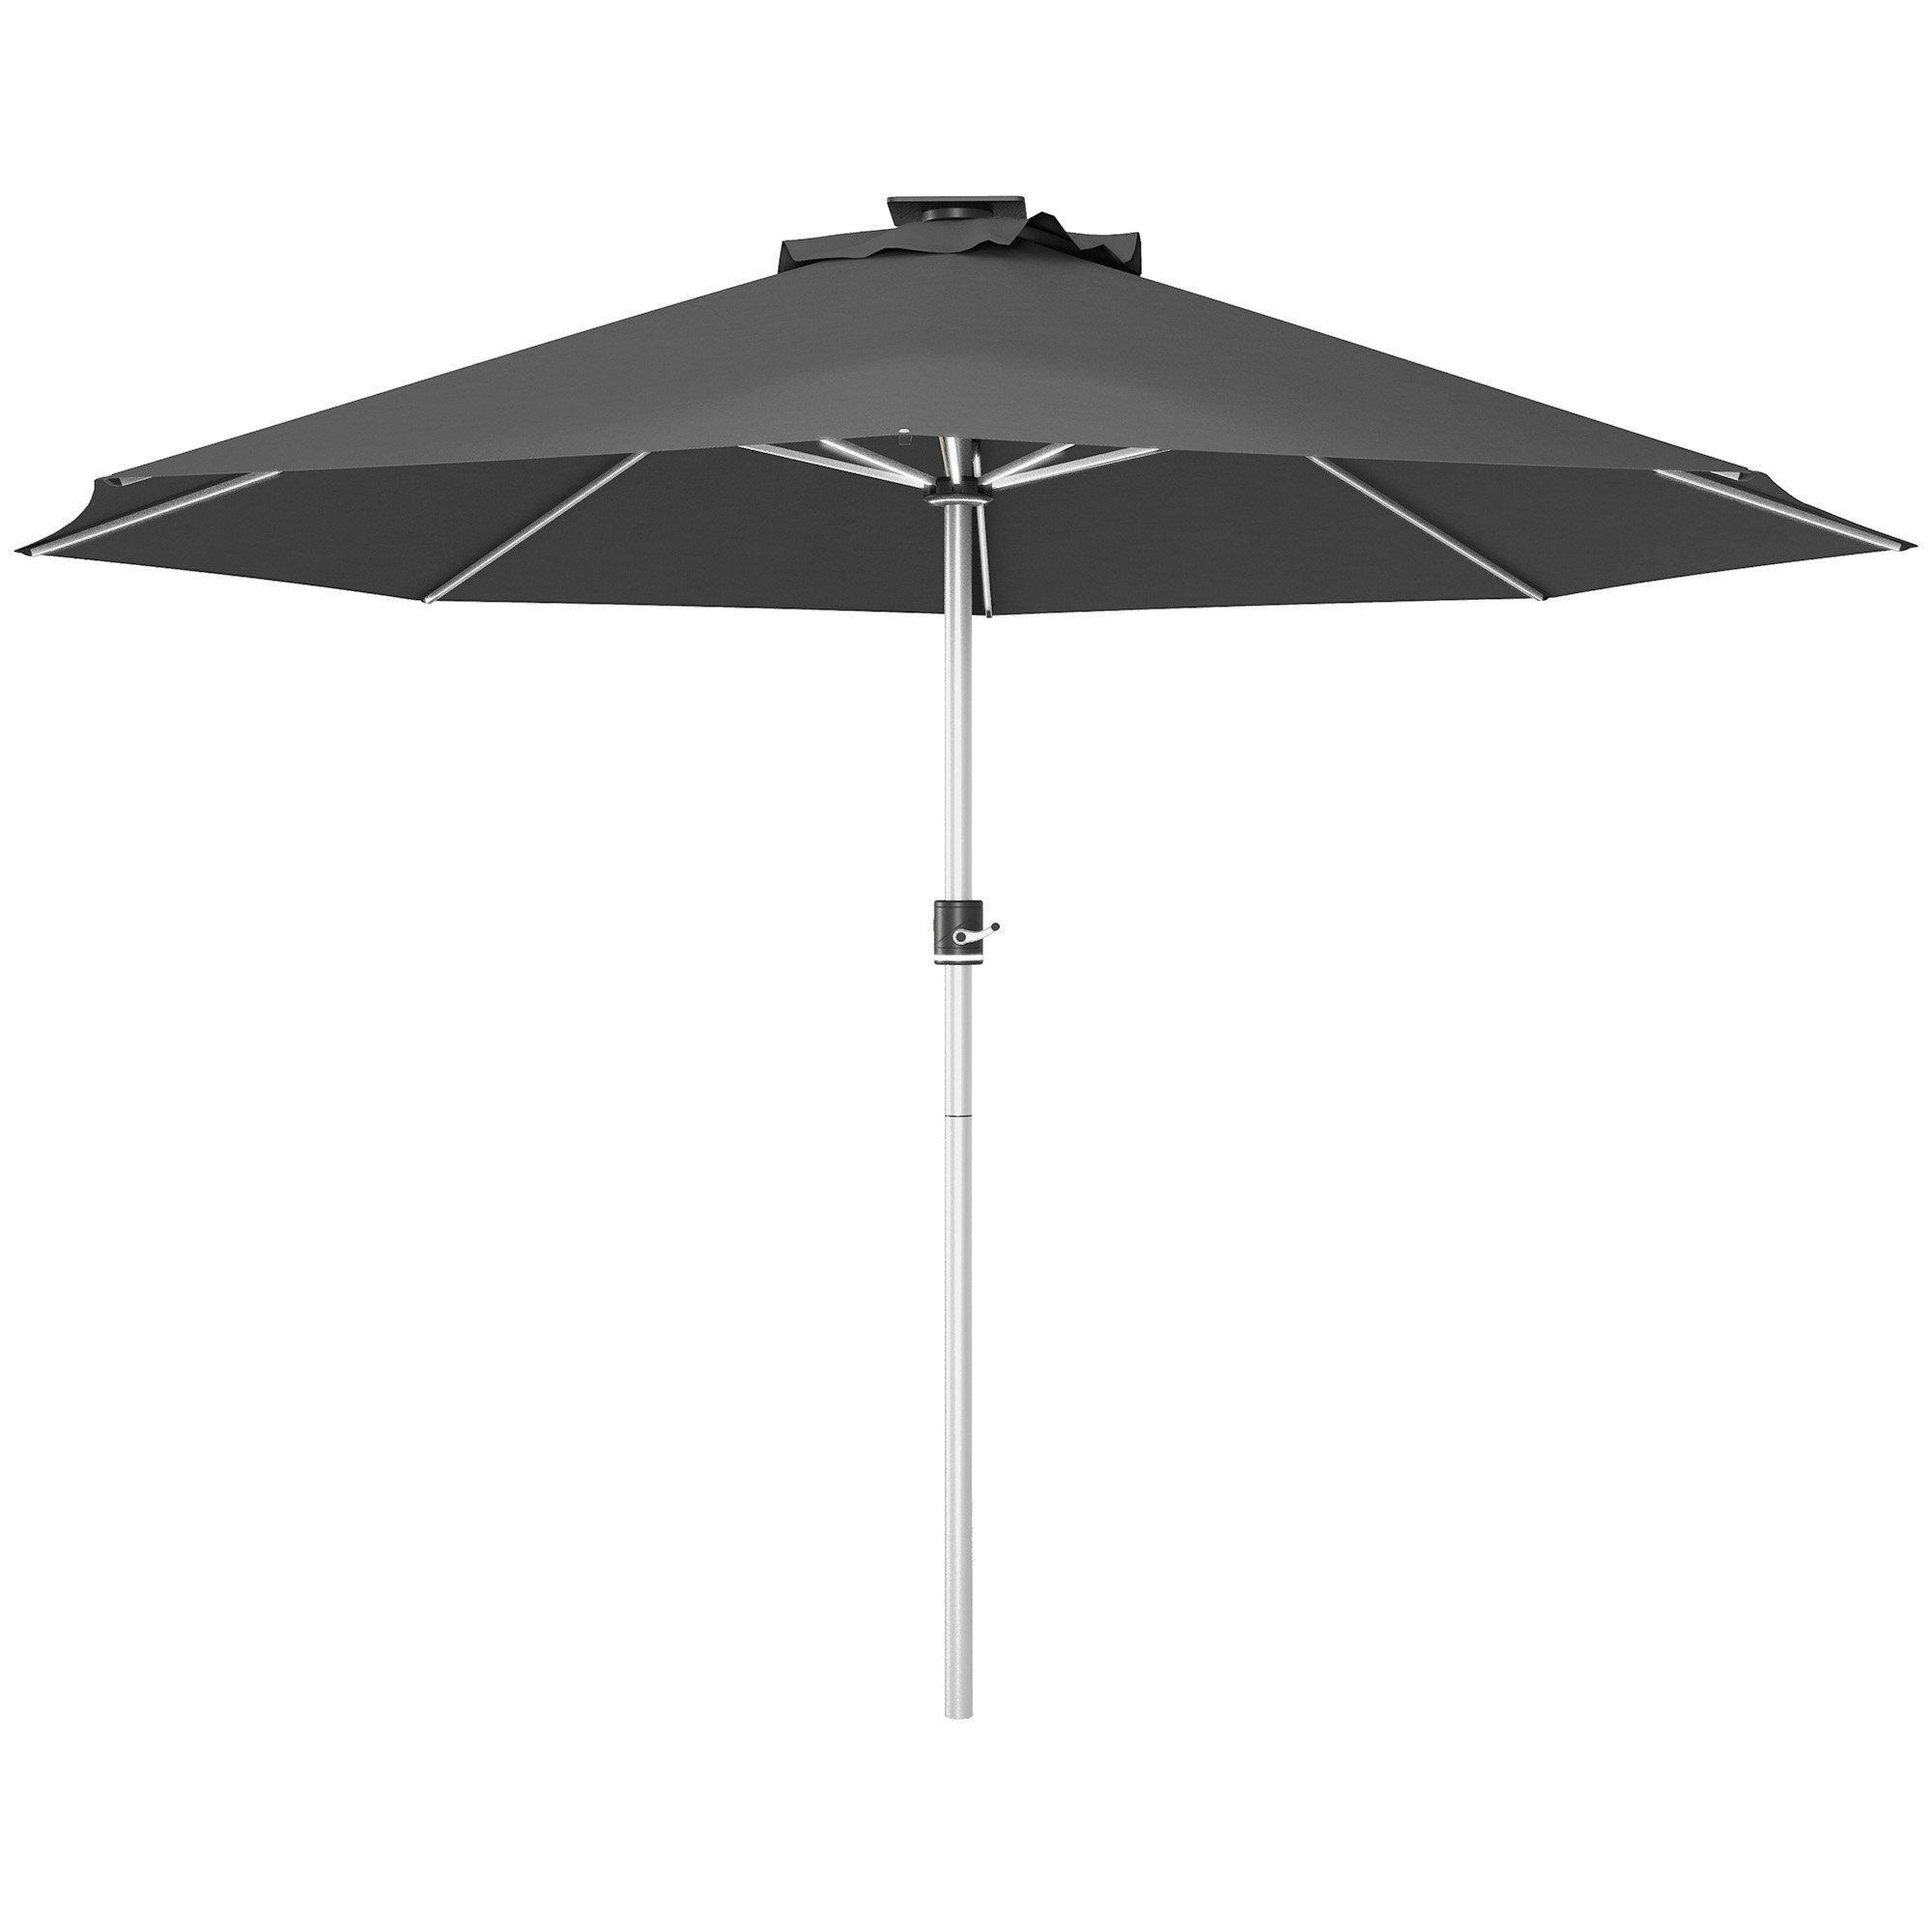 Garden Parasol with USB and Solar Charged LED Lights, Crank Handle - image 1